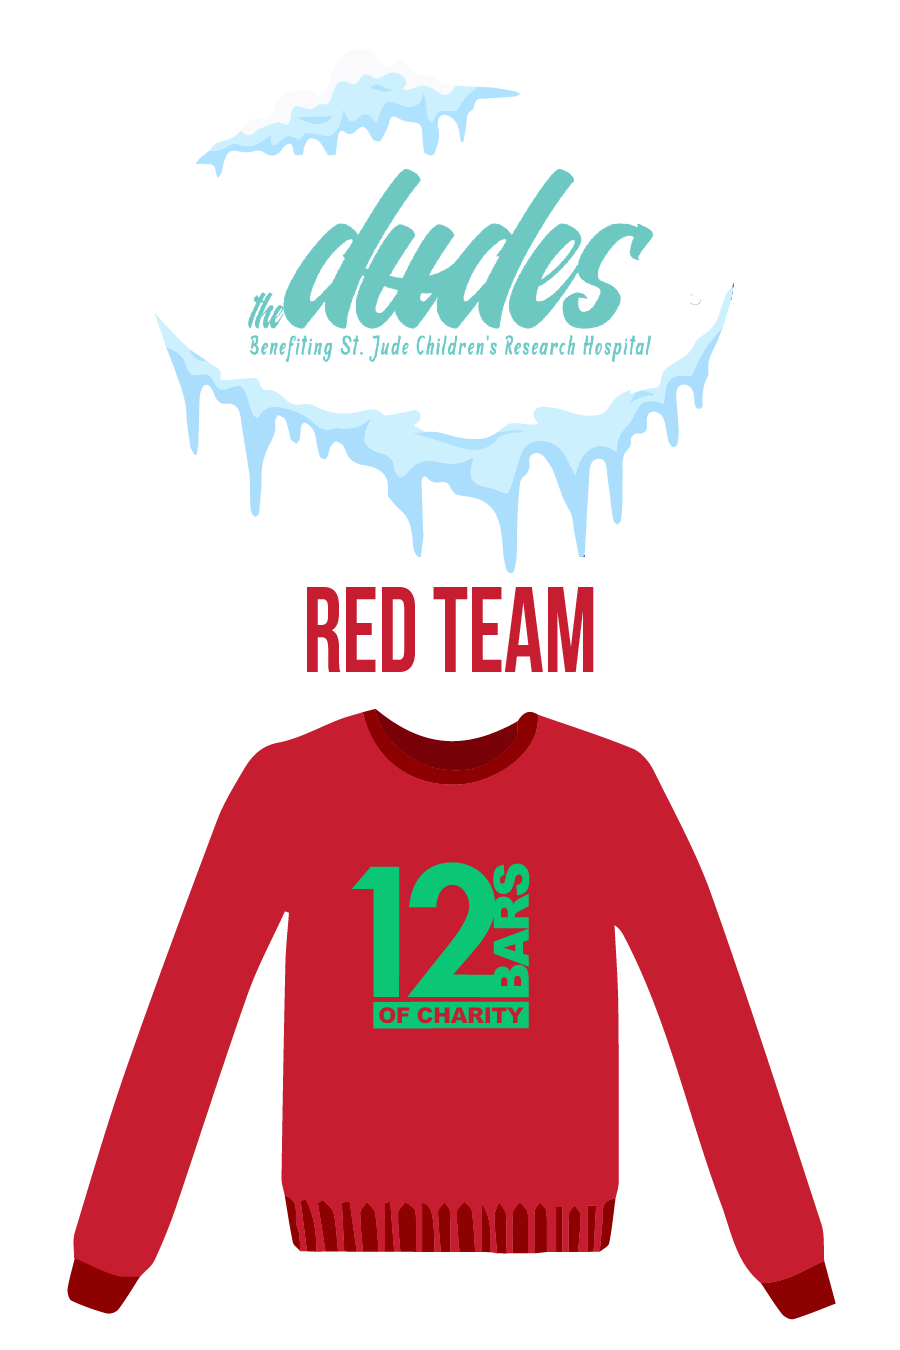 The Dudes (St. Jude) - Team Red